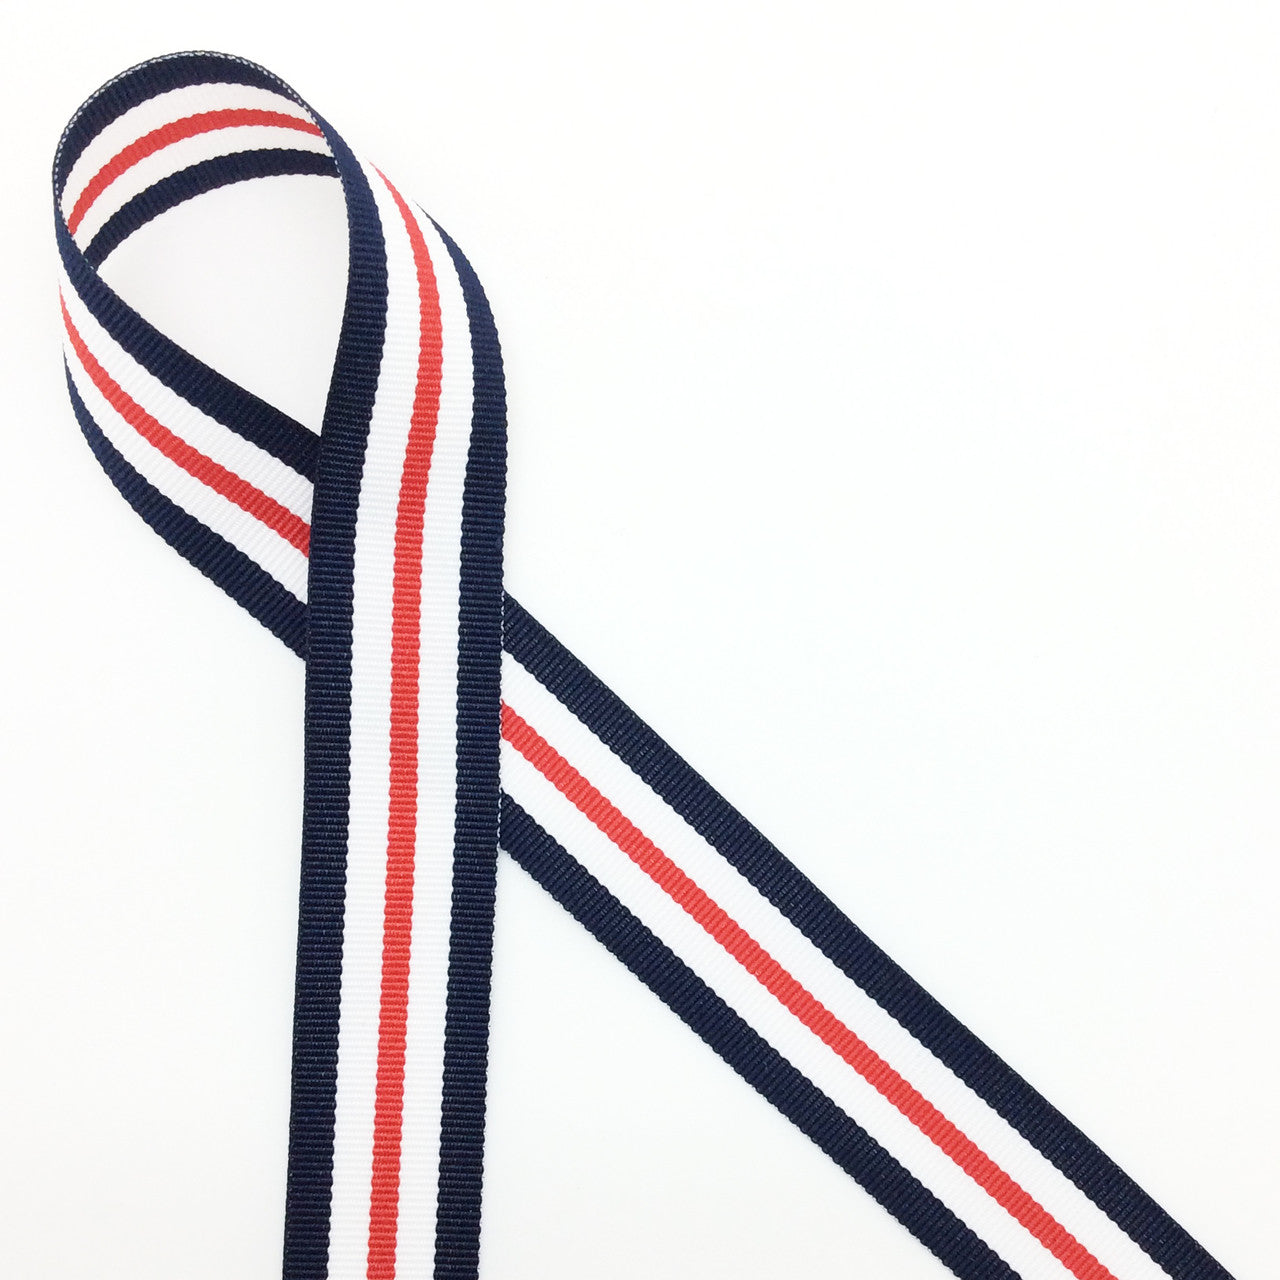 Stripes of red white and blue on 7/8 white grosgrain, 10 Yards